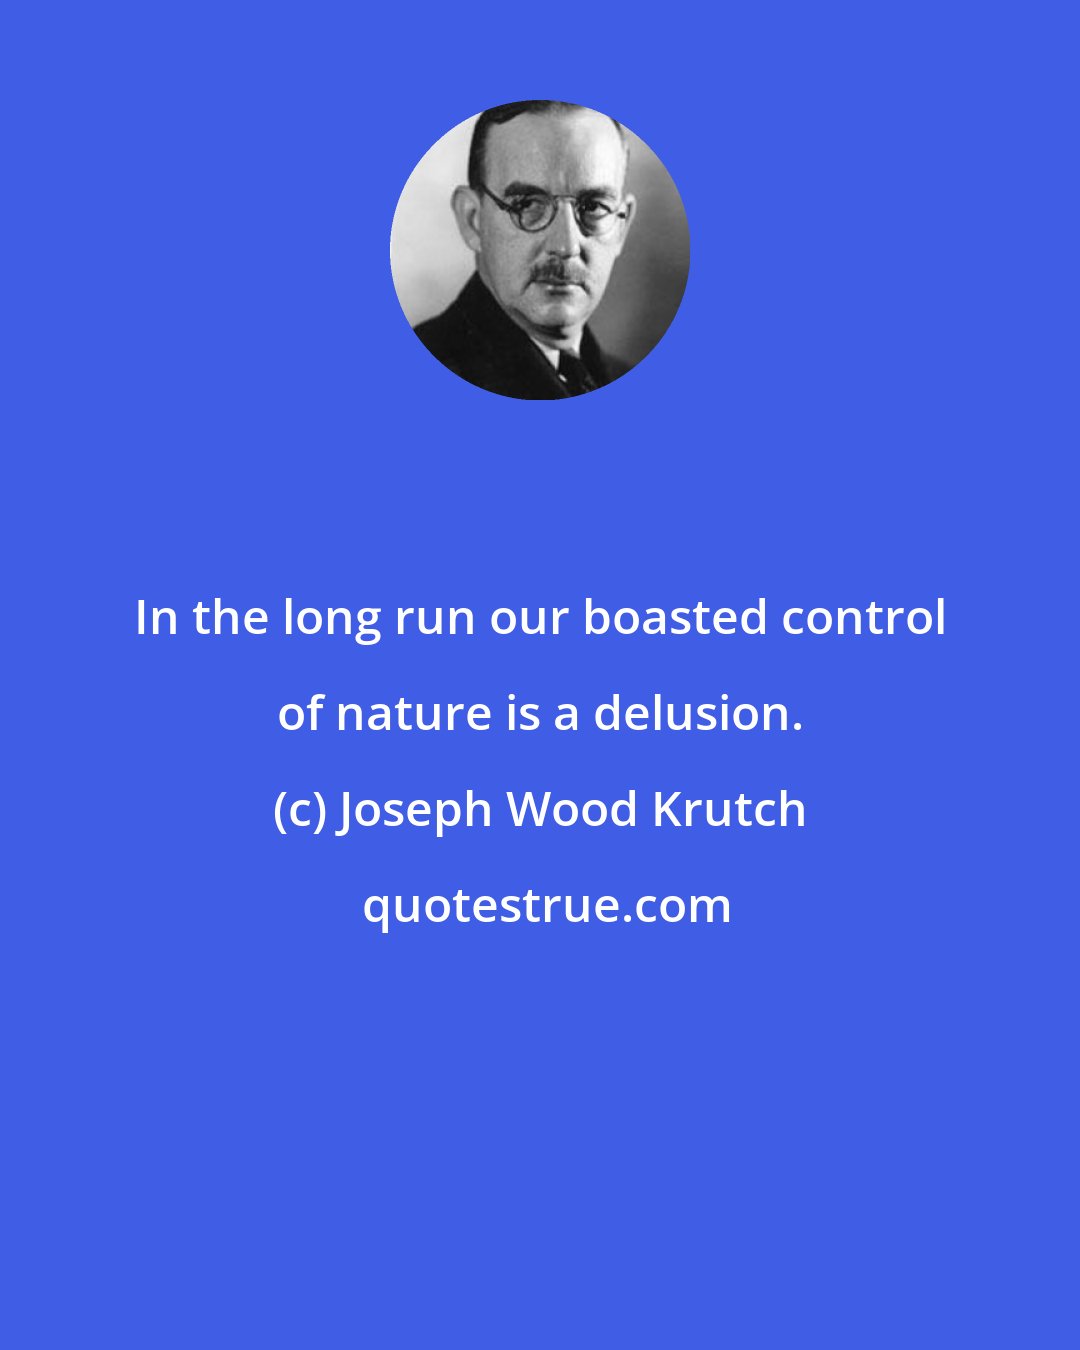 Joseph Wood Krutch: In the long run our boasted control of nature is a delusion.